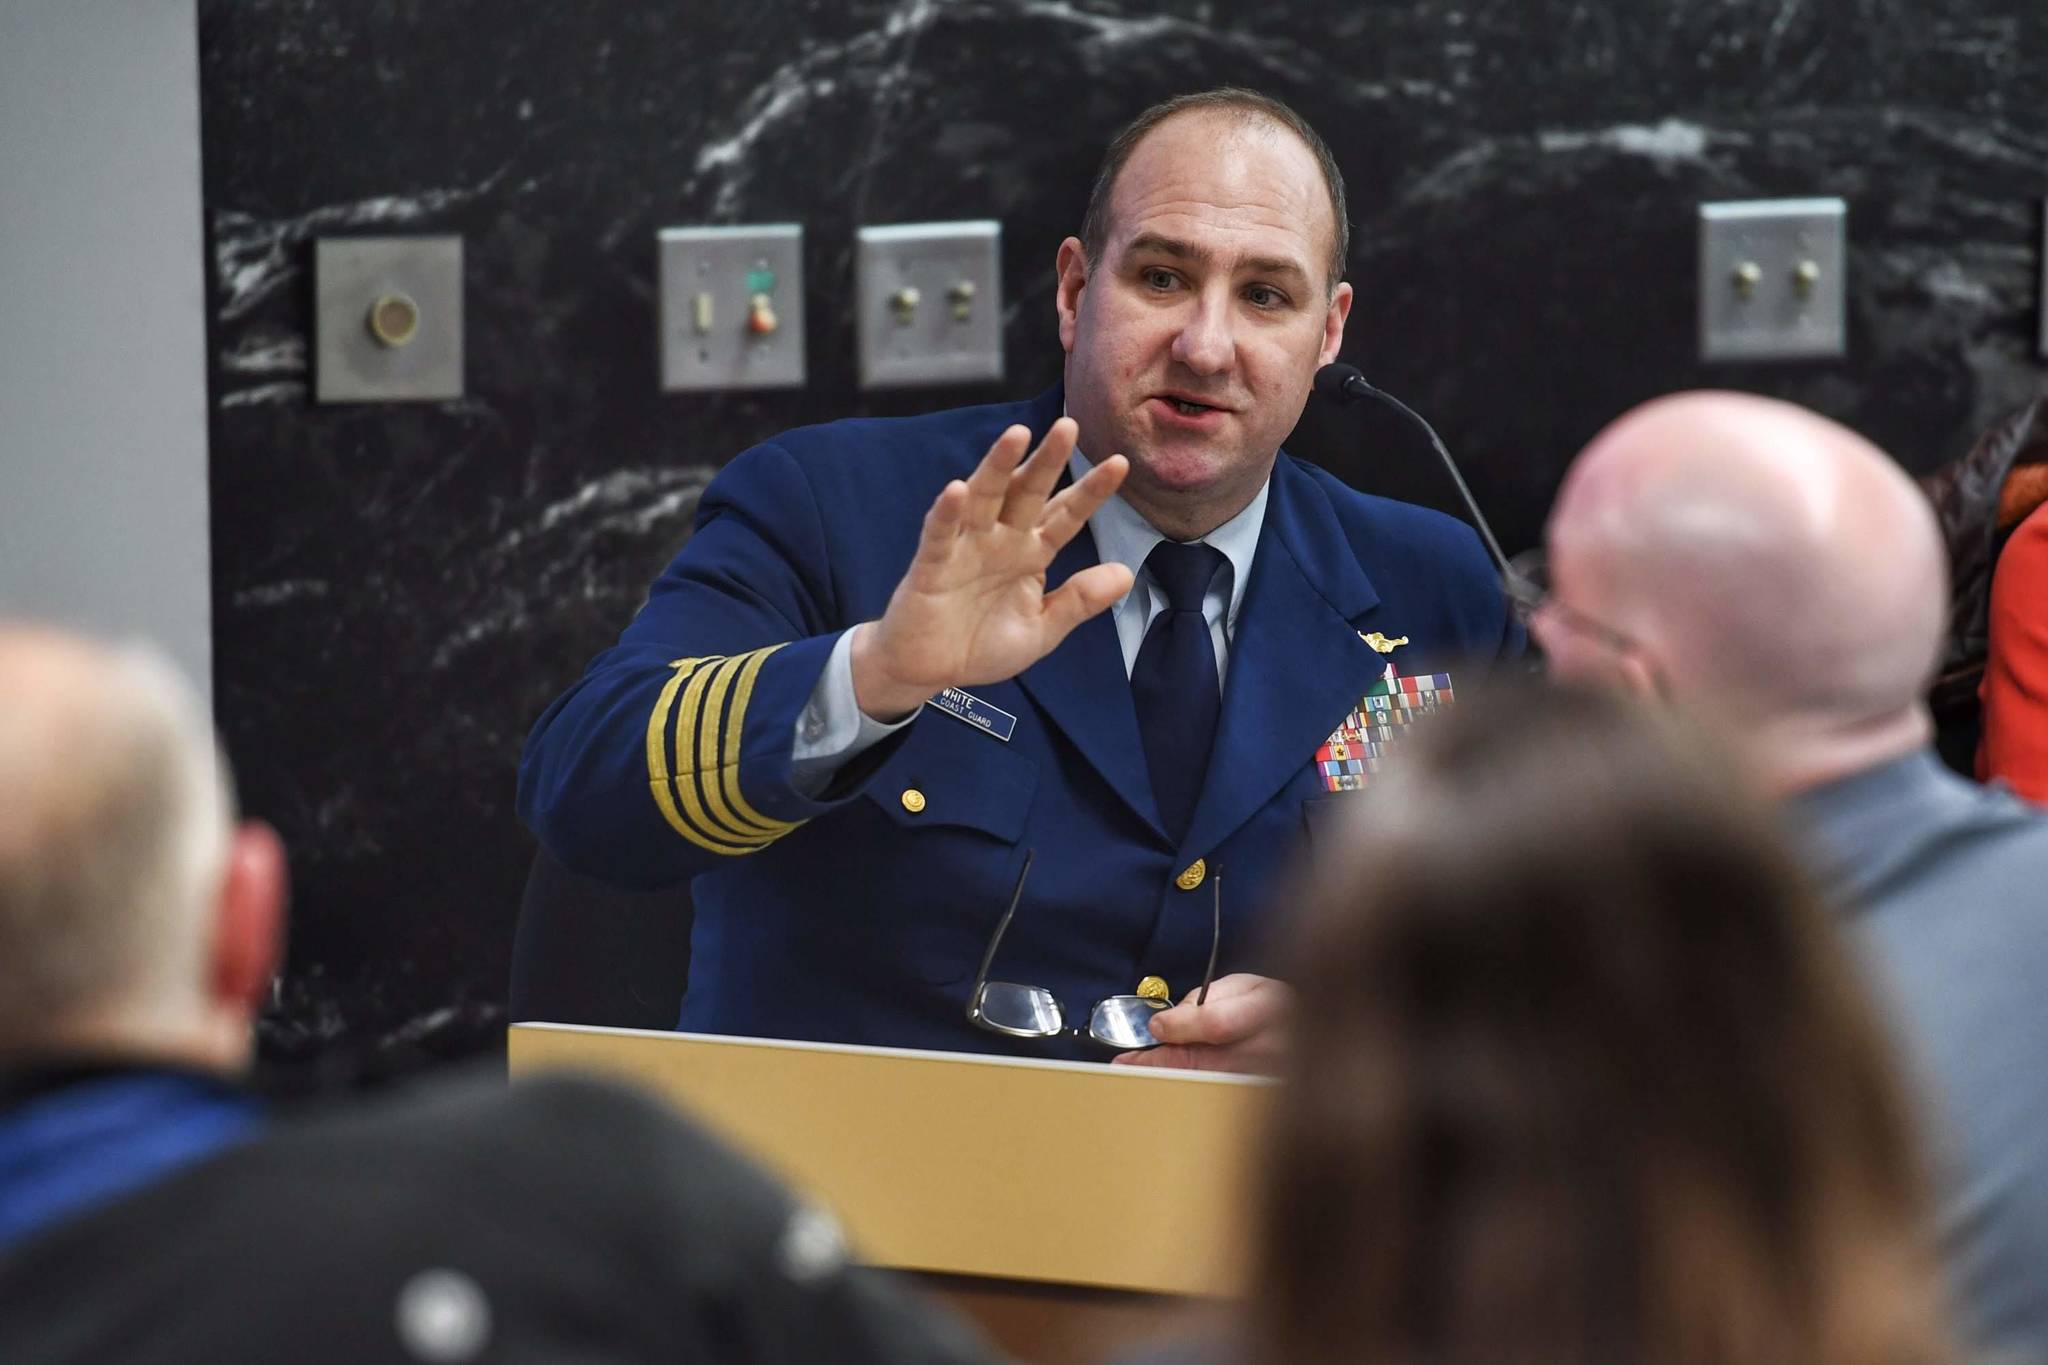 U.S. Coast Guard Capt. Steve White makes a presentation to the Visitor Industry Task Force during its meeting Tuesday, Jan. 7, 2020. (Michael Penn | Juneau Empire)